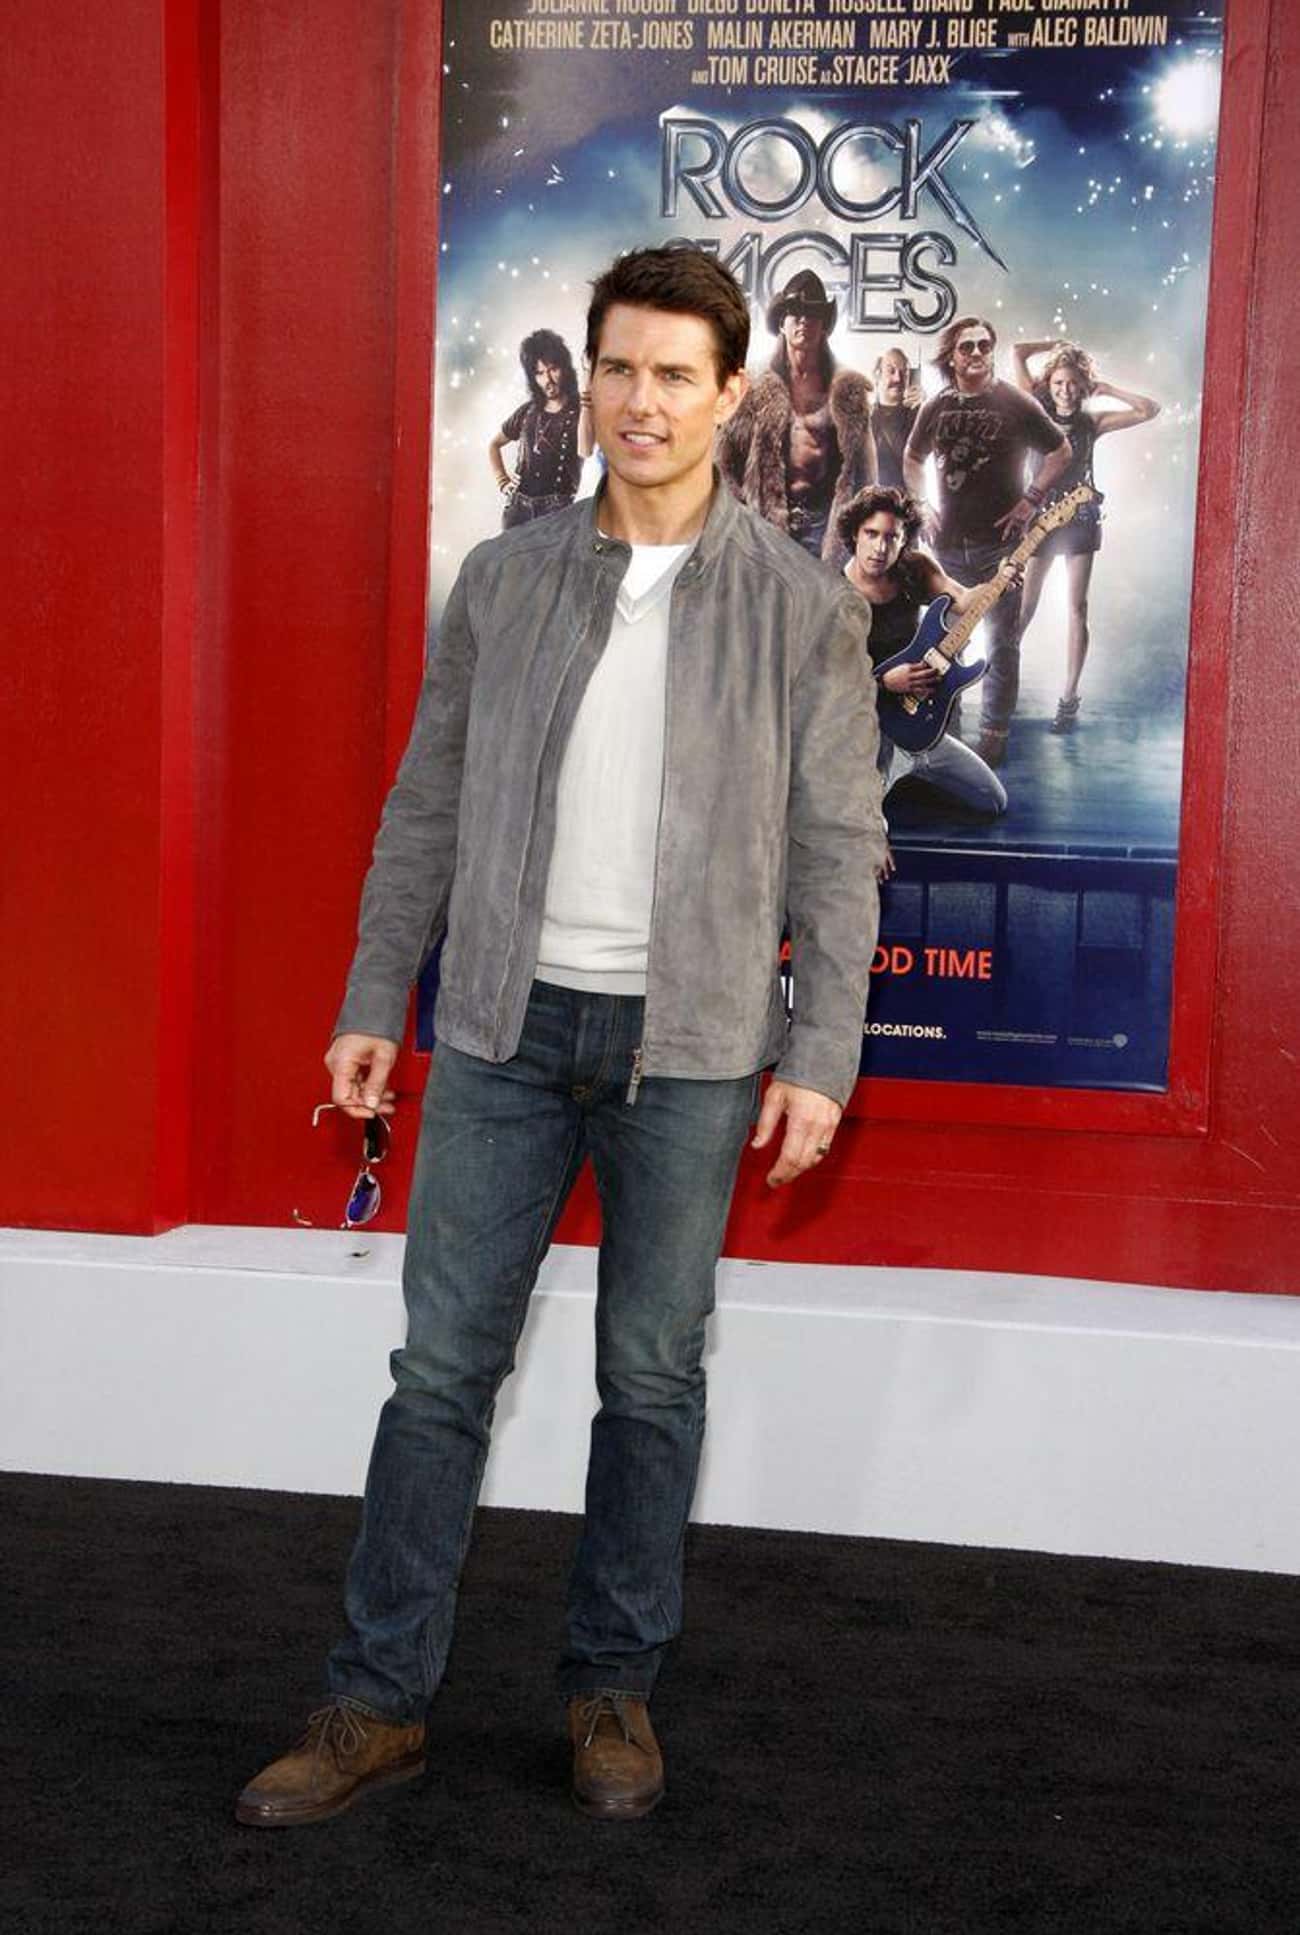 June 2012: Cruise Premieres His Film 'Rock of Ages' Without Holmes